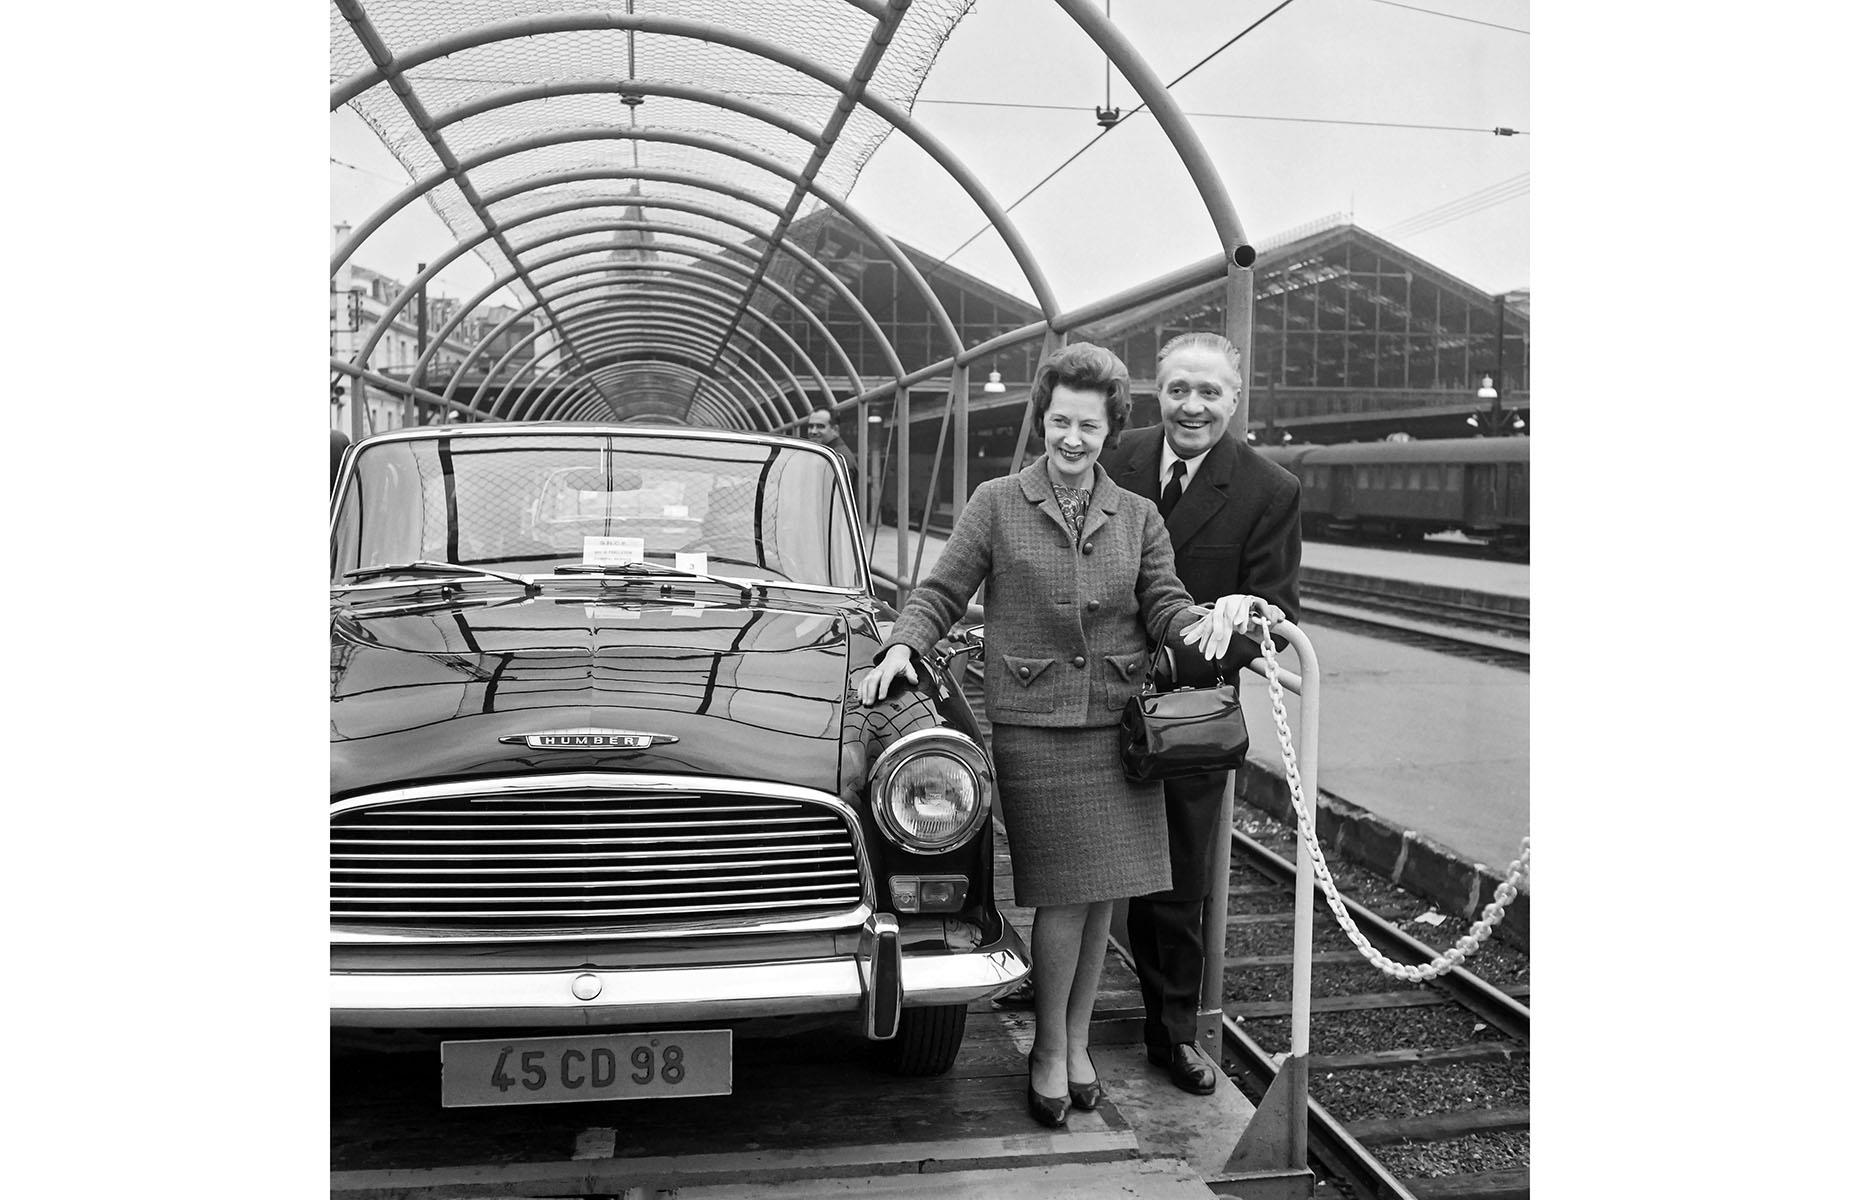 Although construction on the Channel Tunnel, known as Eurotunnel, didn't begin until 1988, plans to build such a tunnel emerged as early as 1802. Here, British Transport Minister Barbara Castle is photographed with the French SNCF (France's national state-owned railway company) CEO André Segalat on 29 October 1966. They're standing onboard a train-car, showcasing how the transport through the tunnel would work, some 30 years before it actually happened.